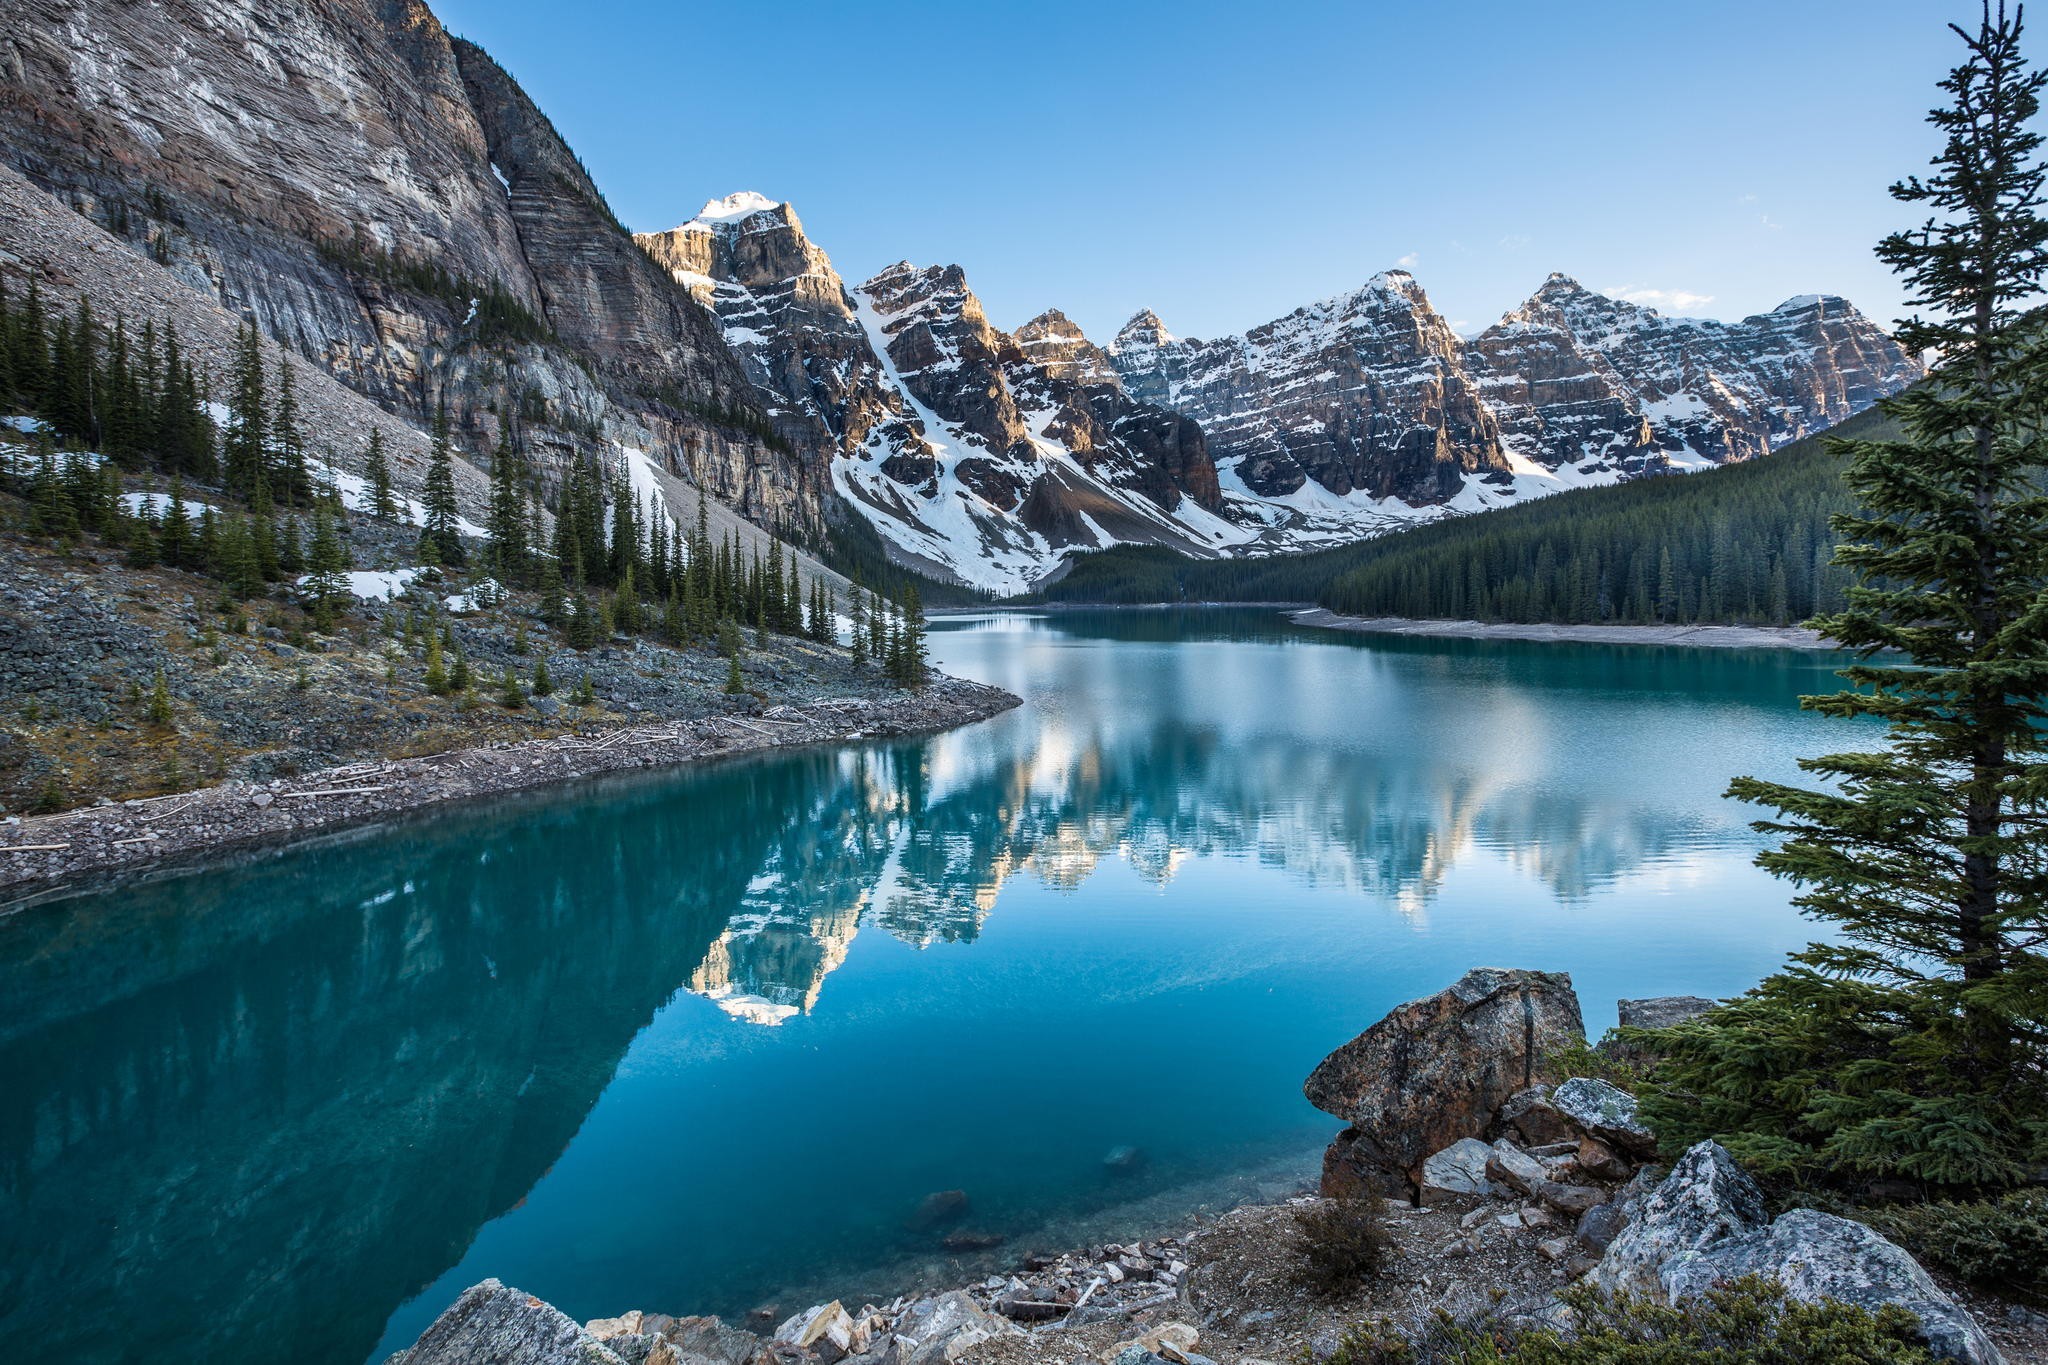 General 2048x1365 nature landscape Banff National Park lake mountains forest Canada Moraine Lake